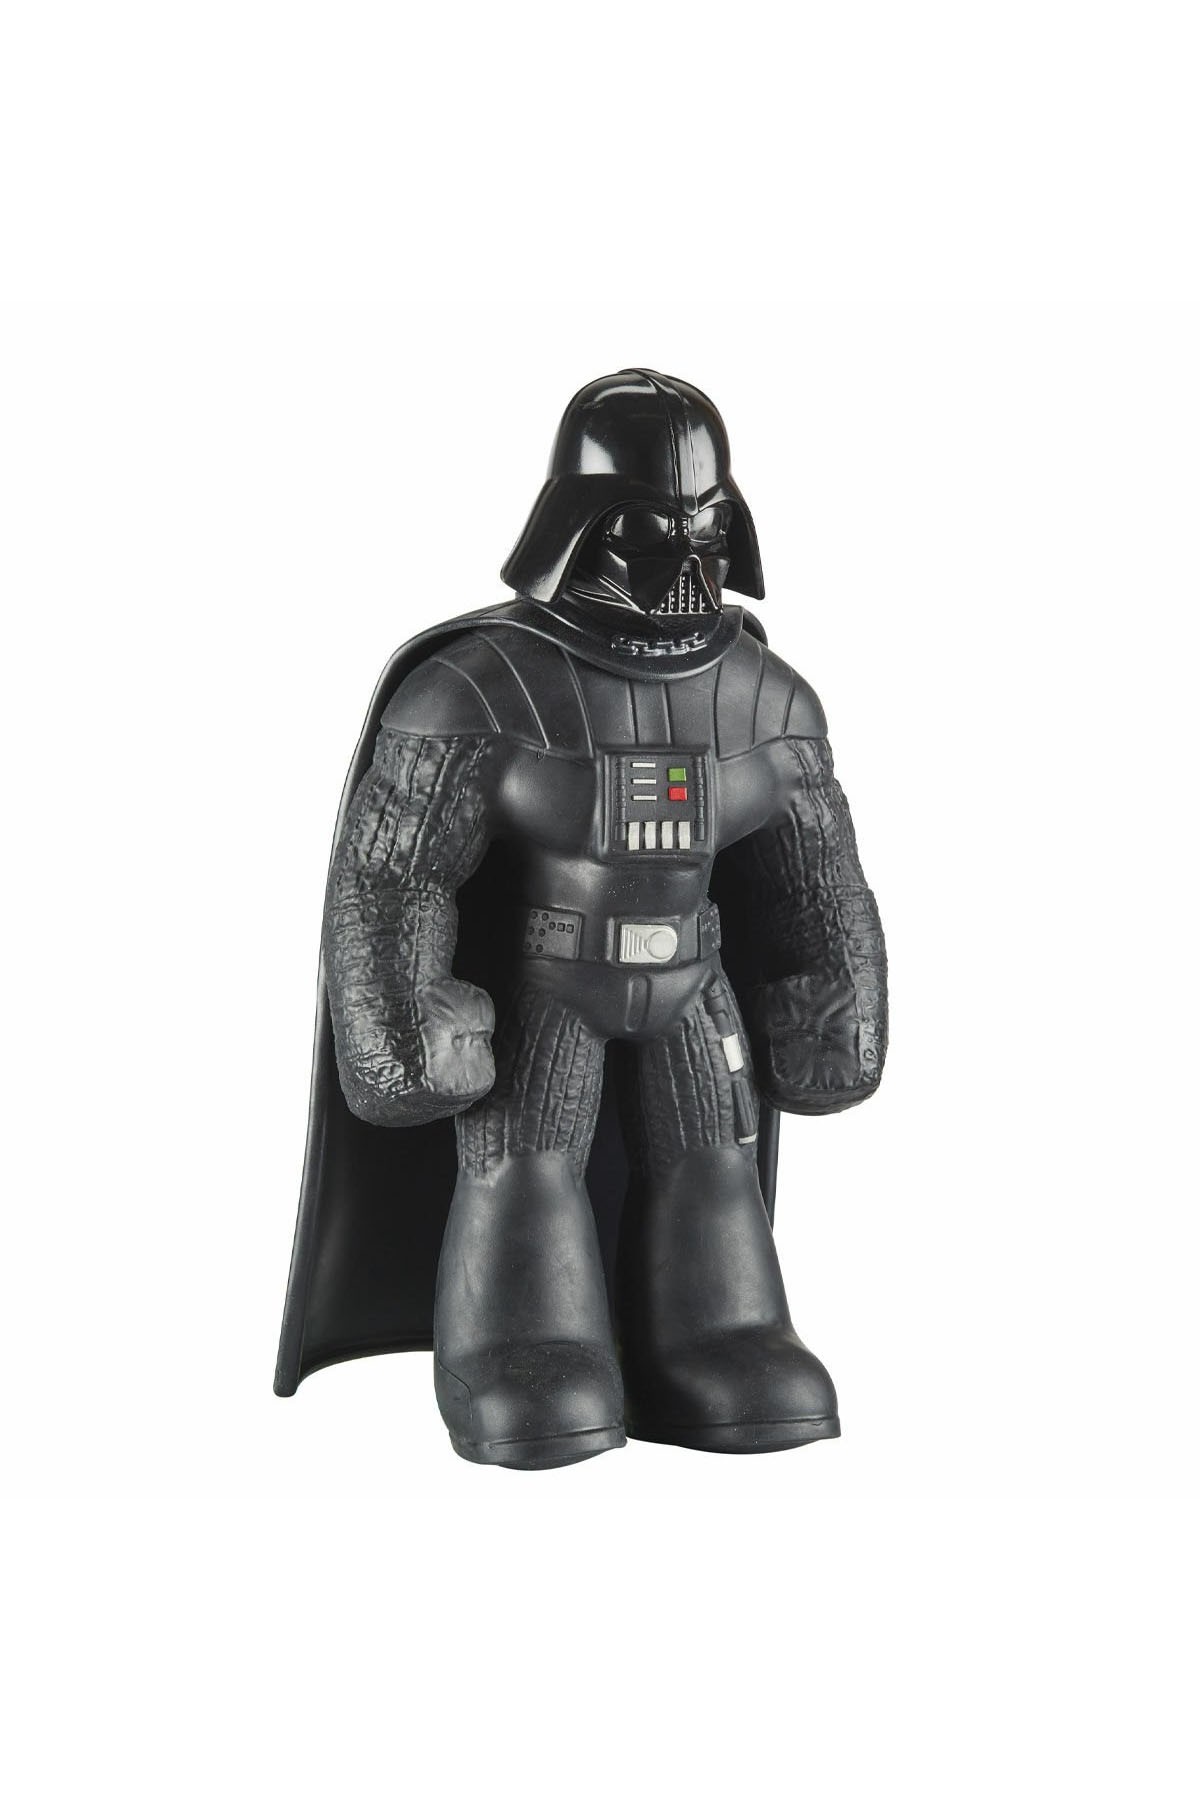 Stretch Armstrong Darth Vader 07698